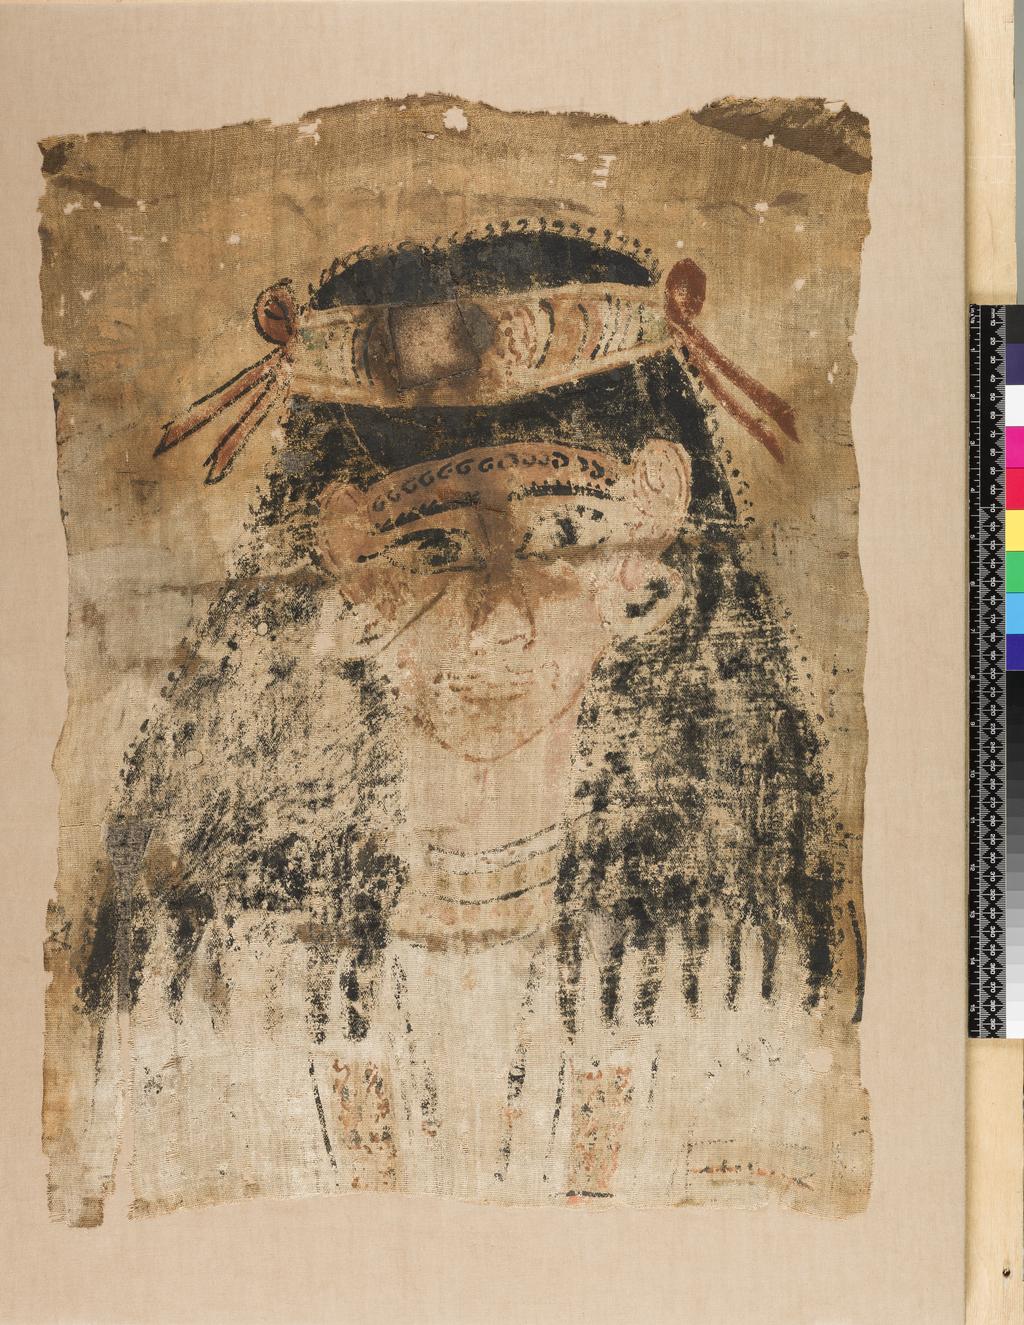 An image of Mummy trappings. Linen shroud. Portrait of woman, on linen mummy shroud. This would have been placed directly over the body of the deceased as an alternative to cartonnage. Production Place: Egypt. Painted linen, height 66 cm, length 44 cm, 200-300 AD. Roman Period.